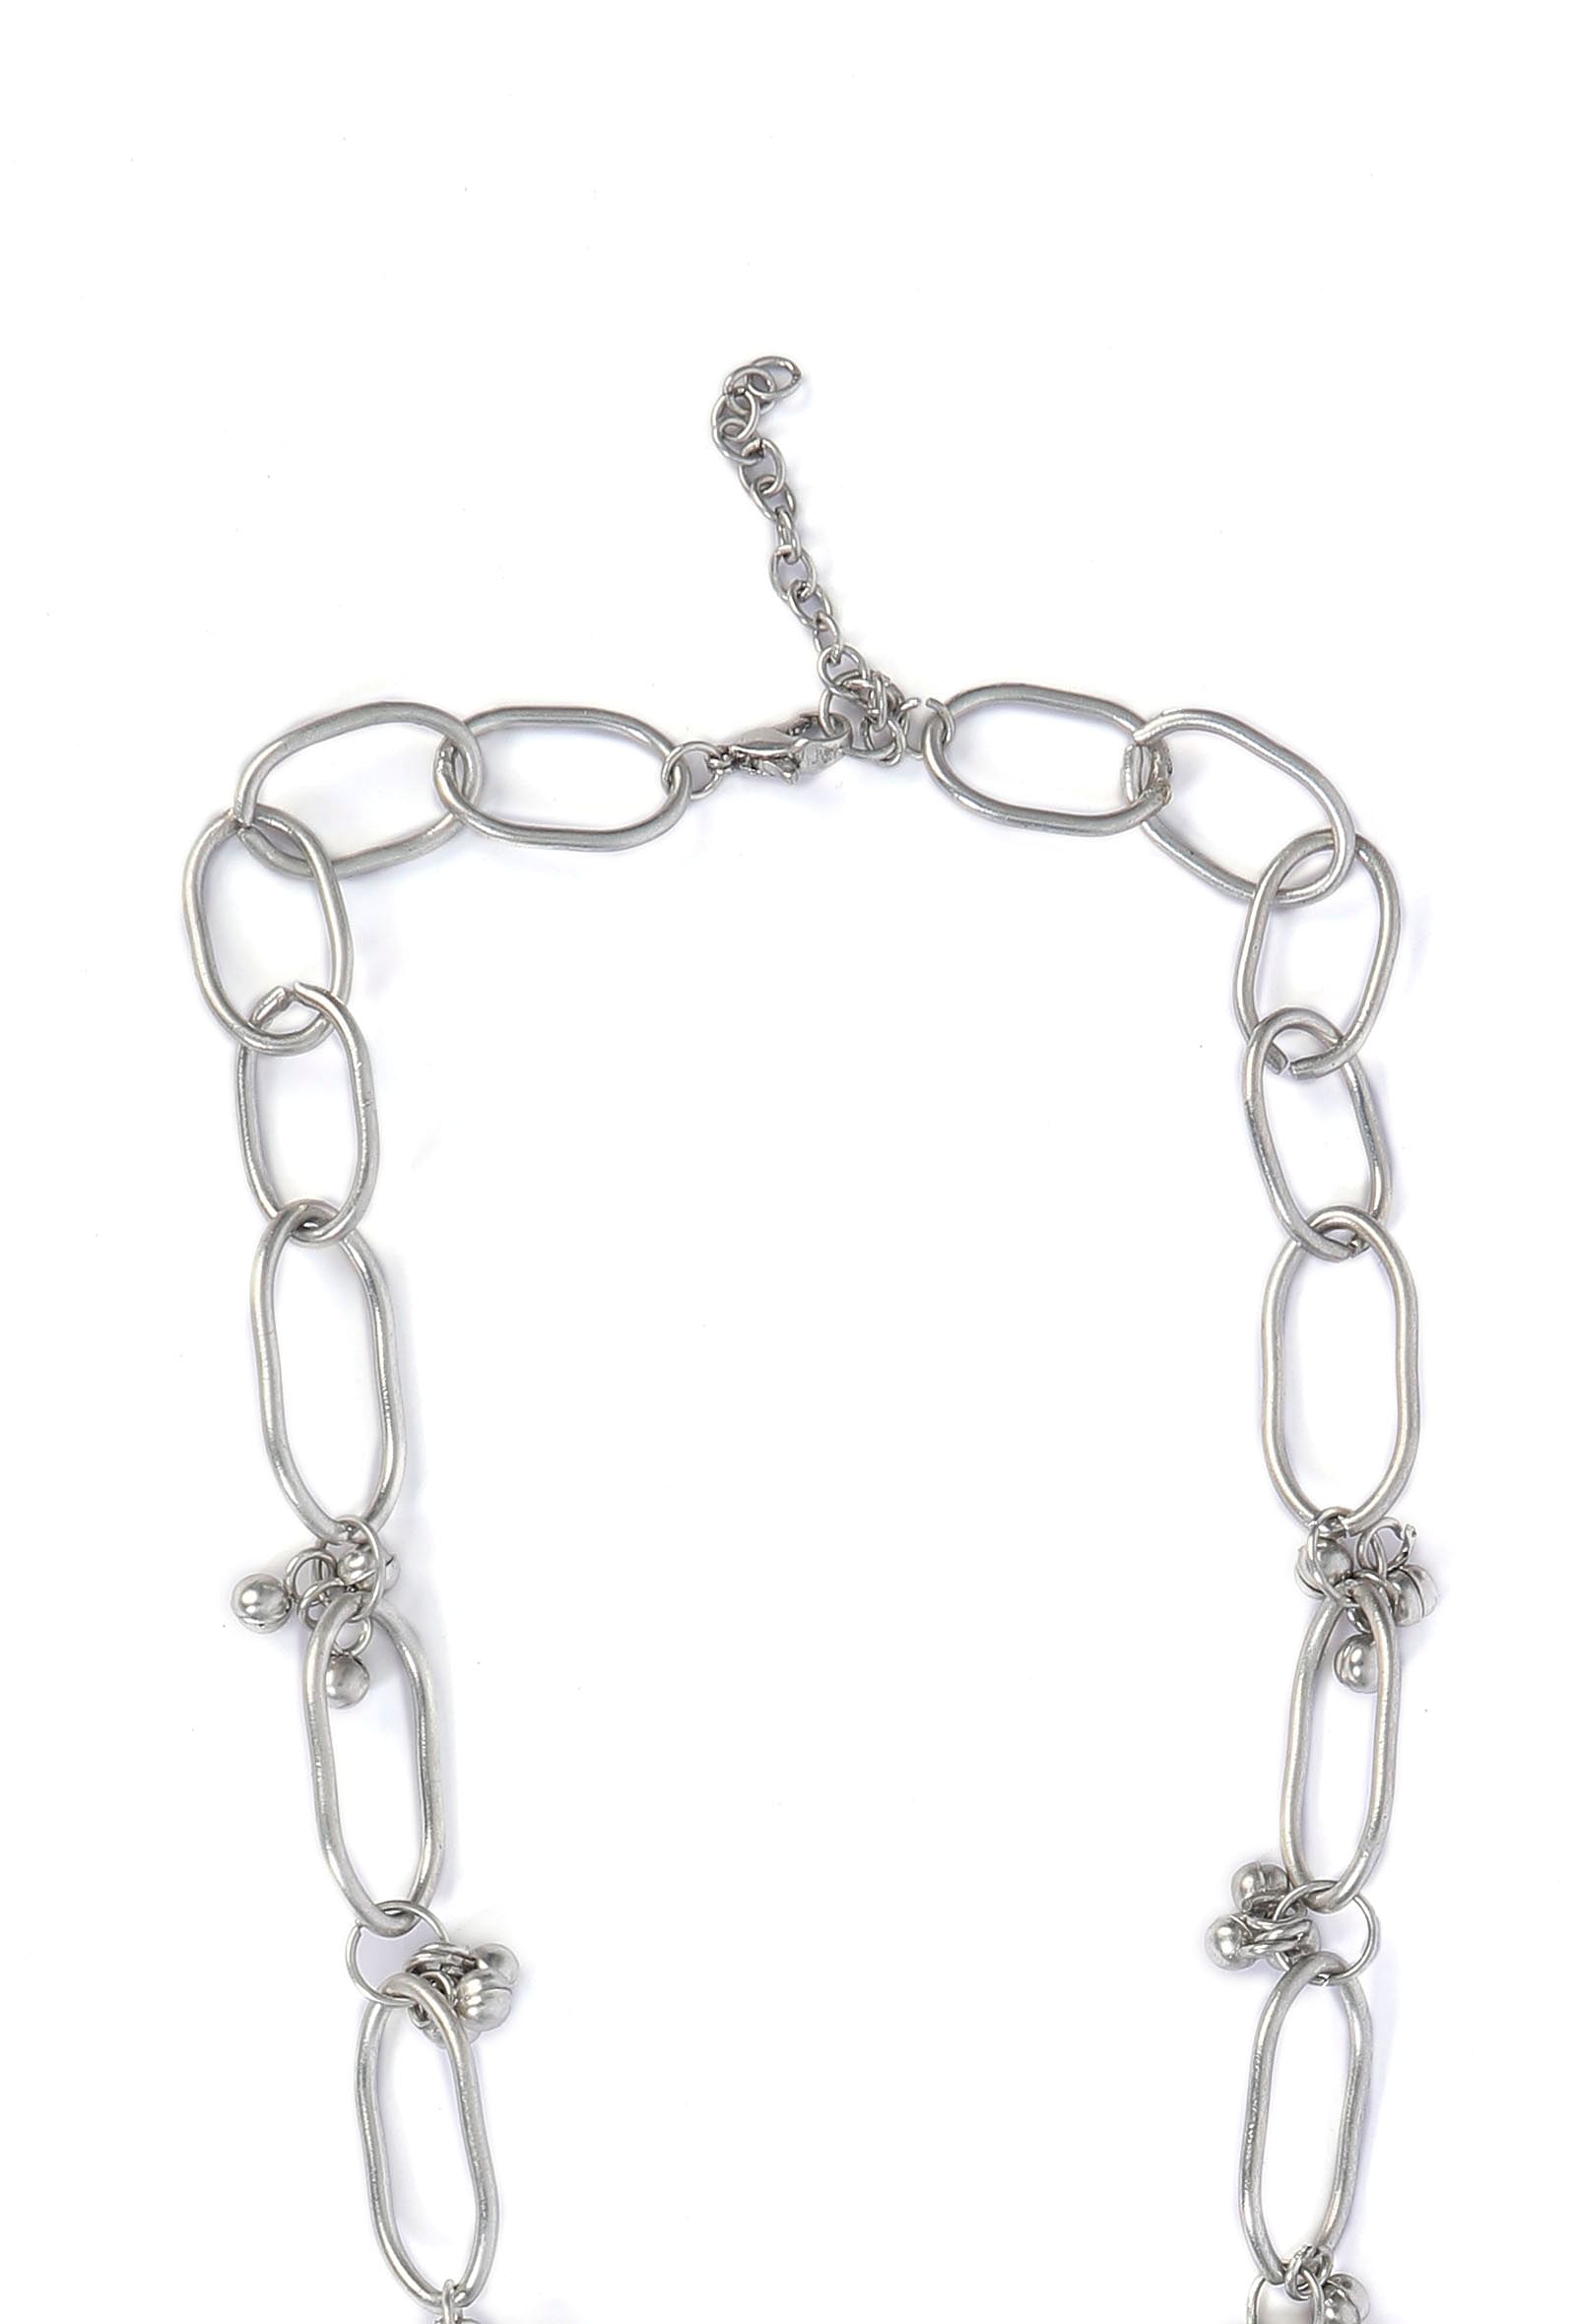 Sarah Chain Silver Necklace